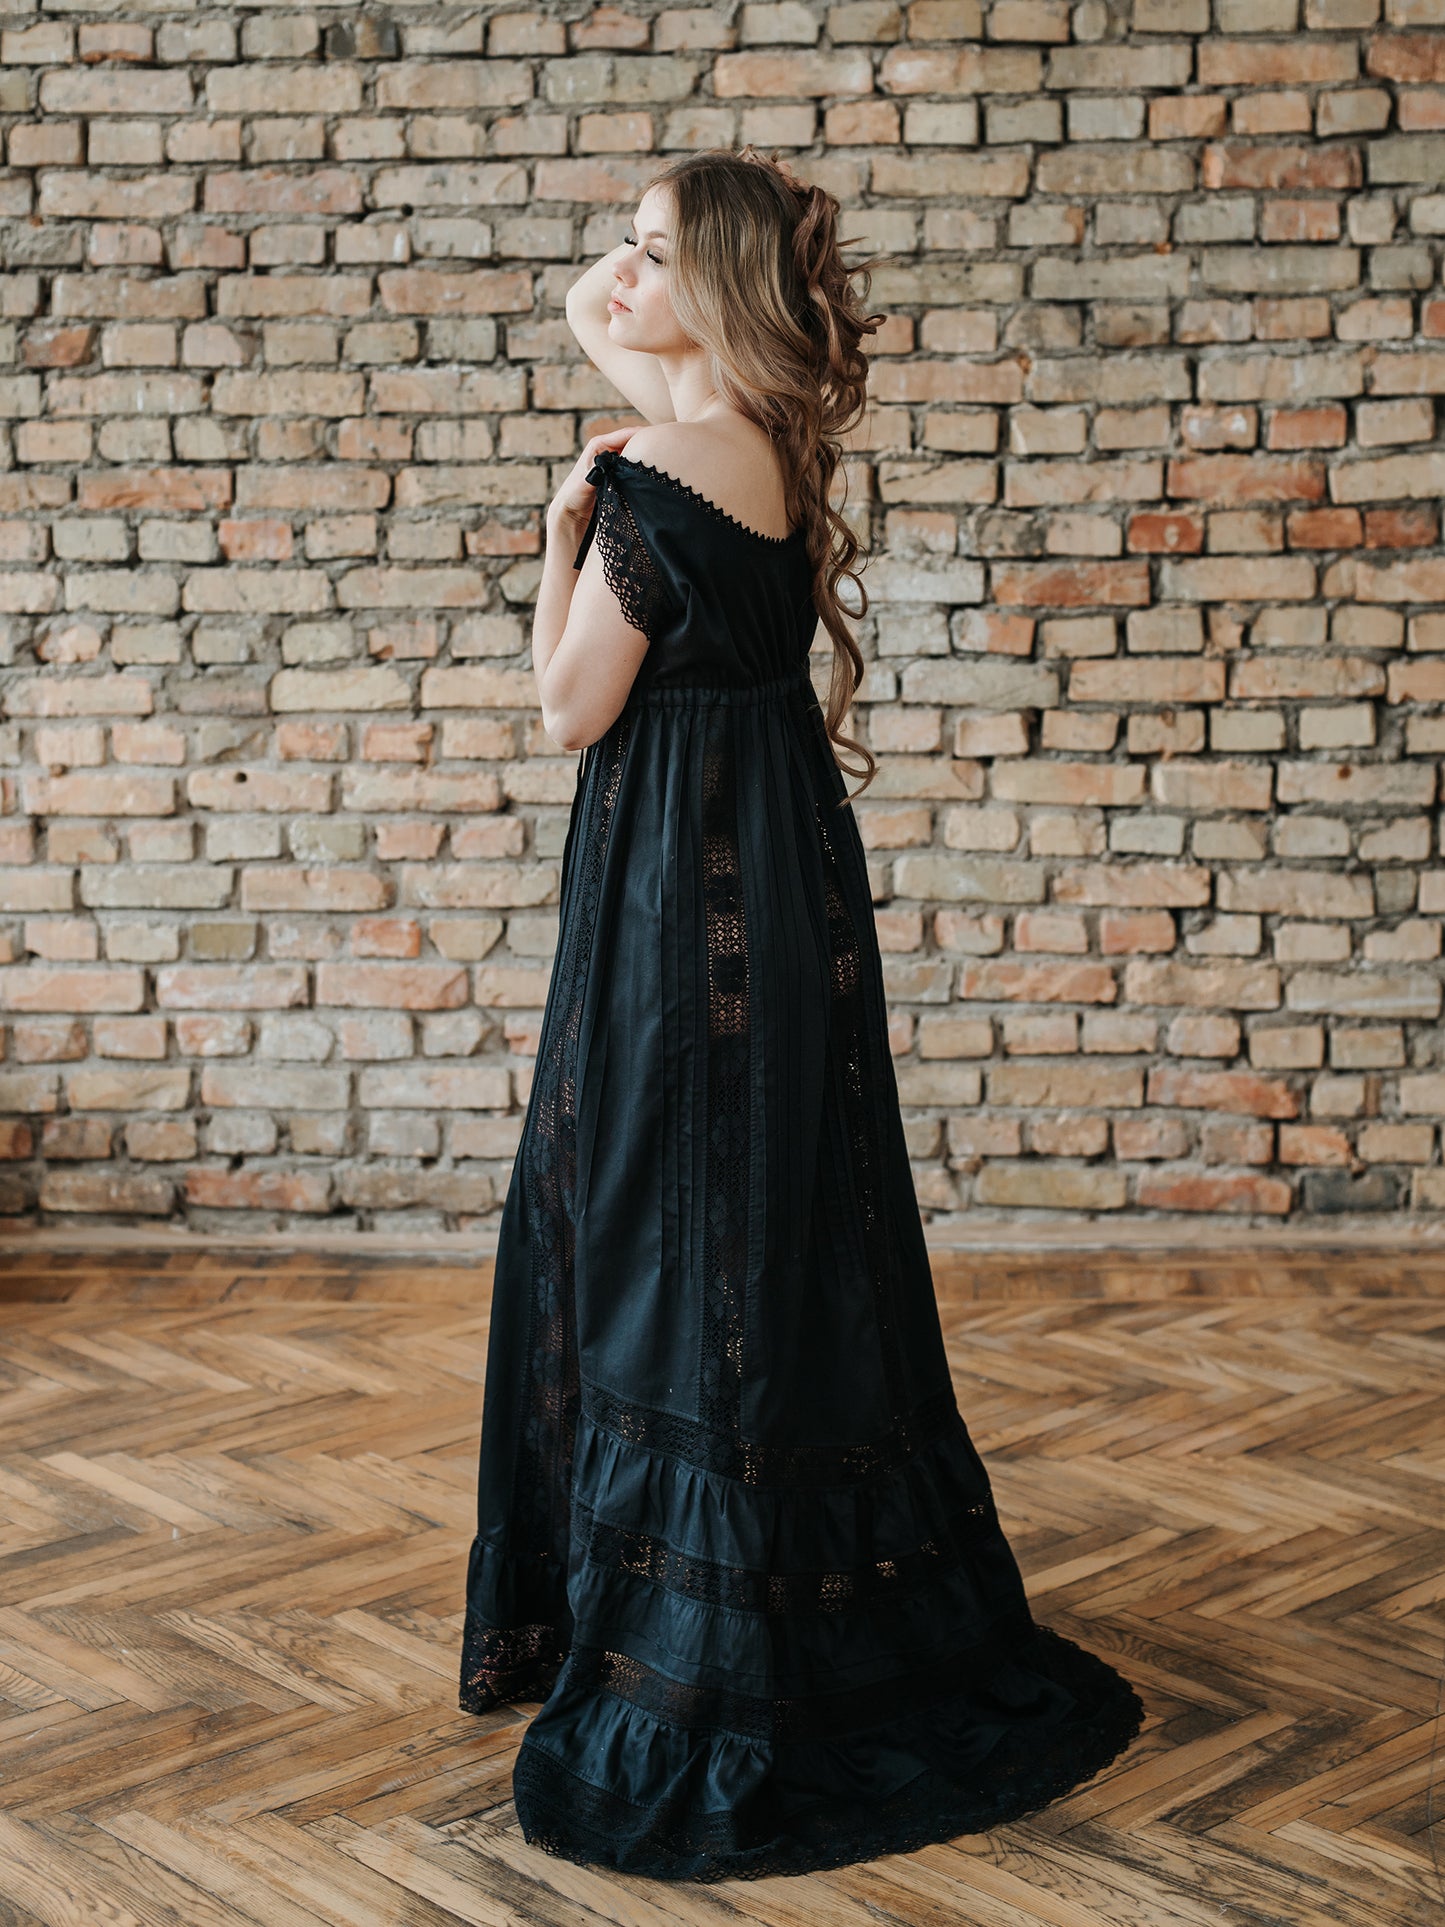 Delicate Beauty - Victorian Inspired Night Gown in Black Cotton